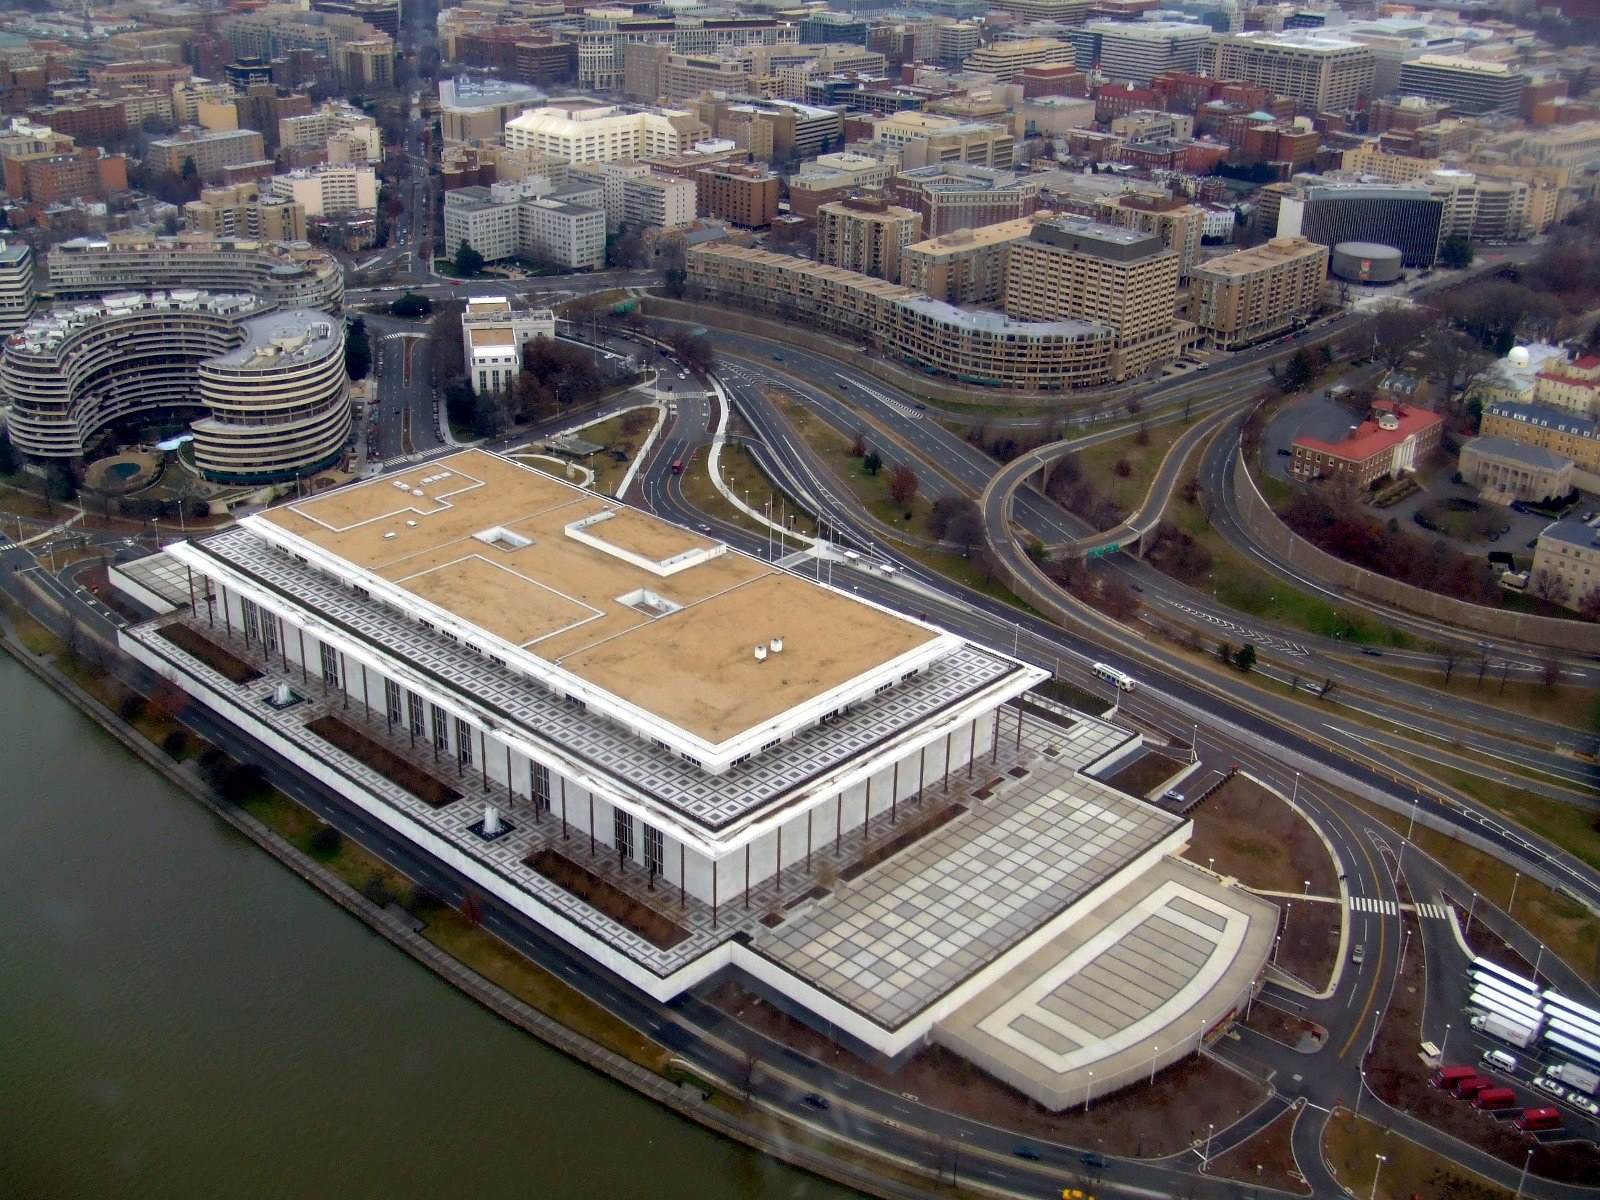 8-astonishing-facts-about-john-f-kennedy-center-for-the-performing-arts